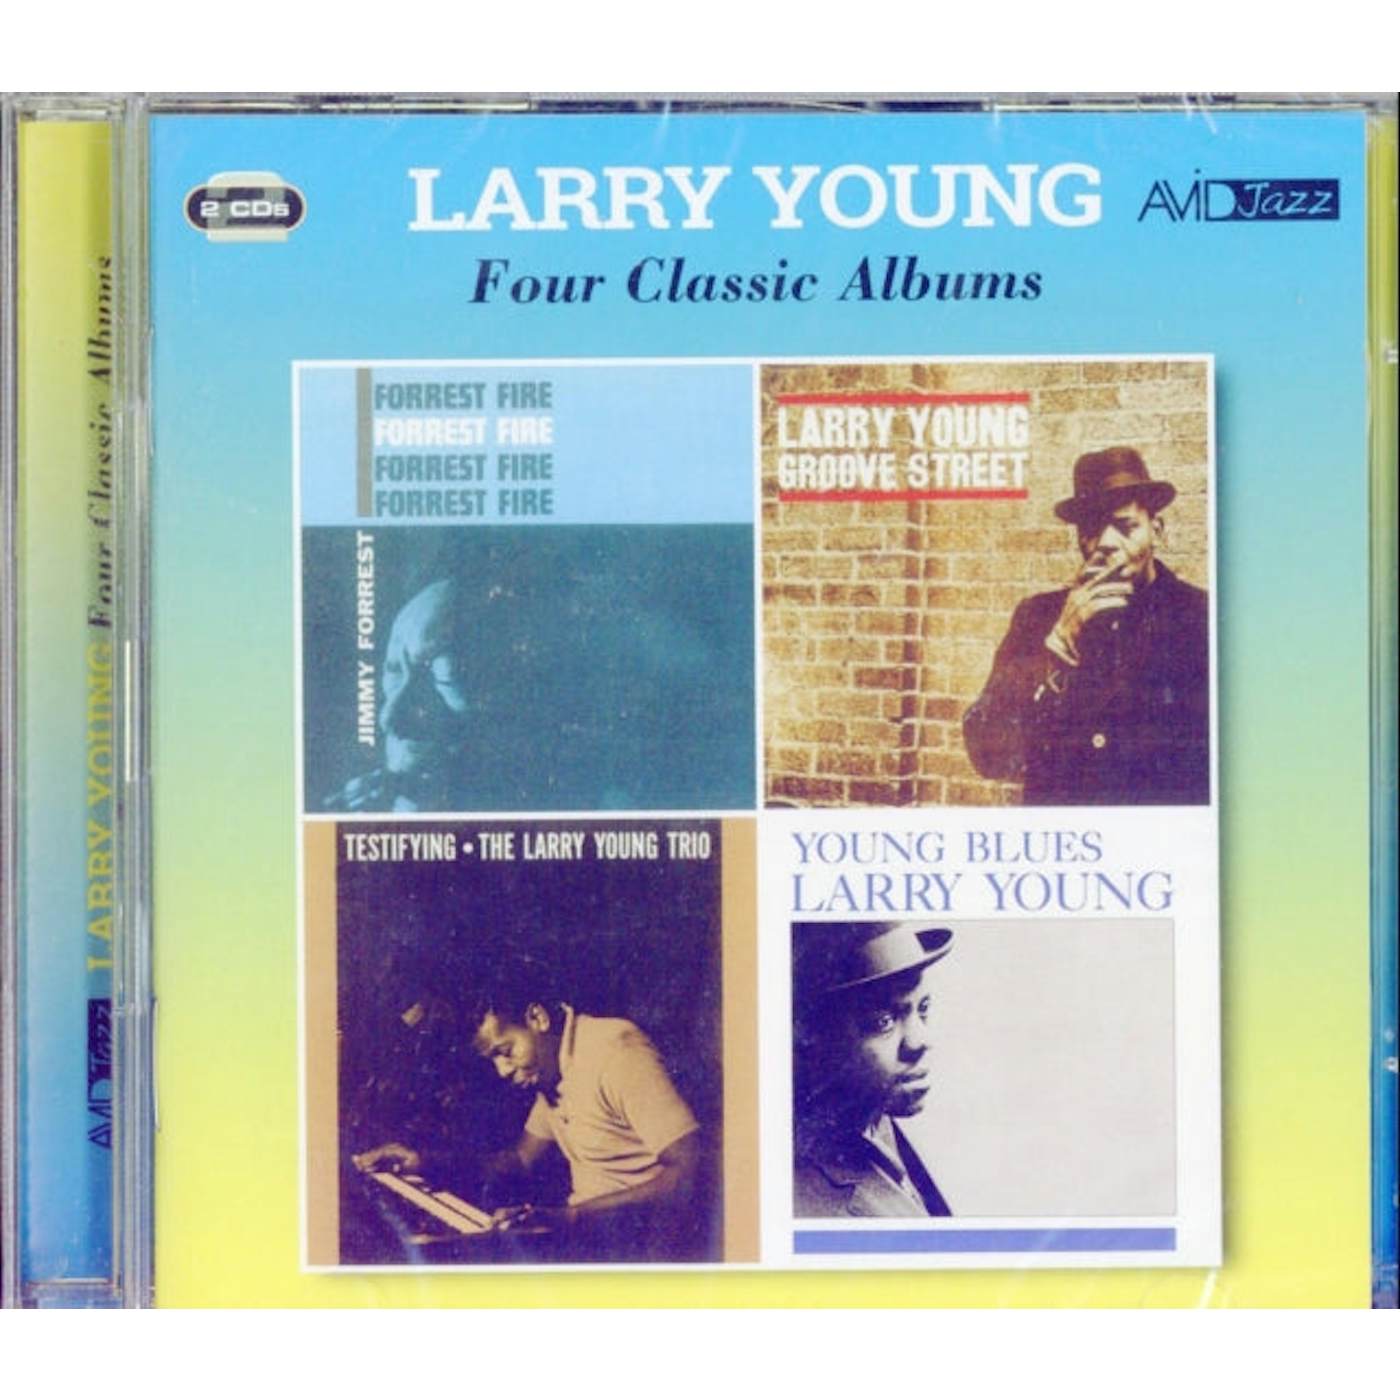 Larry Young CD - Four Classic Albums (Forrest Fire / Groove Street / Testifying / Young Blues)